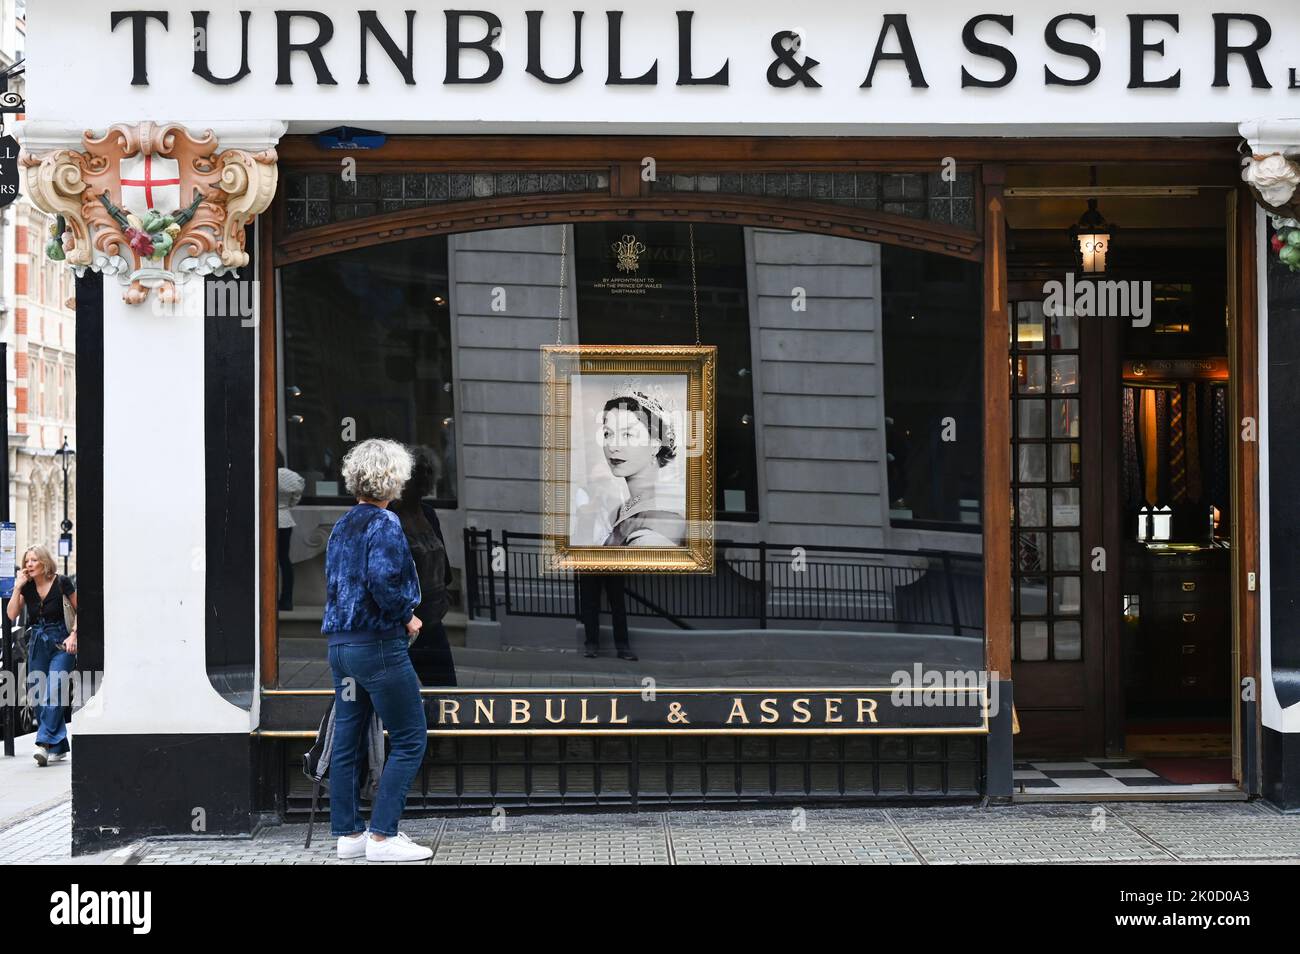 London UK 10th September 2022 - Turnbull & Asser clothes shop in Jermyn St London after The Queen Elizabeth II died at the age of 96 on Thursday 8th September 2022   Photograph taken by Simon Dack Stock Photo